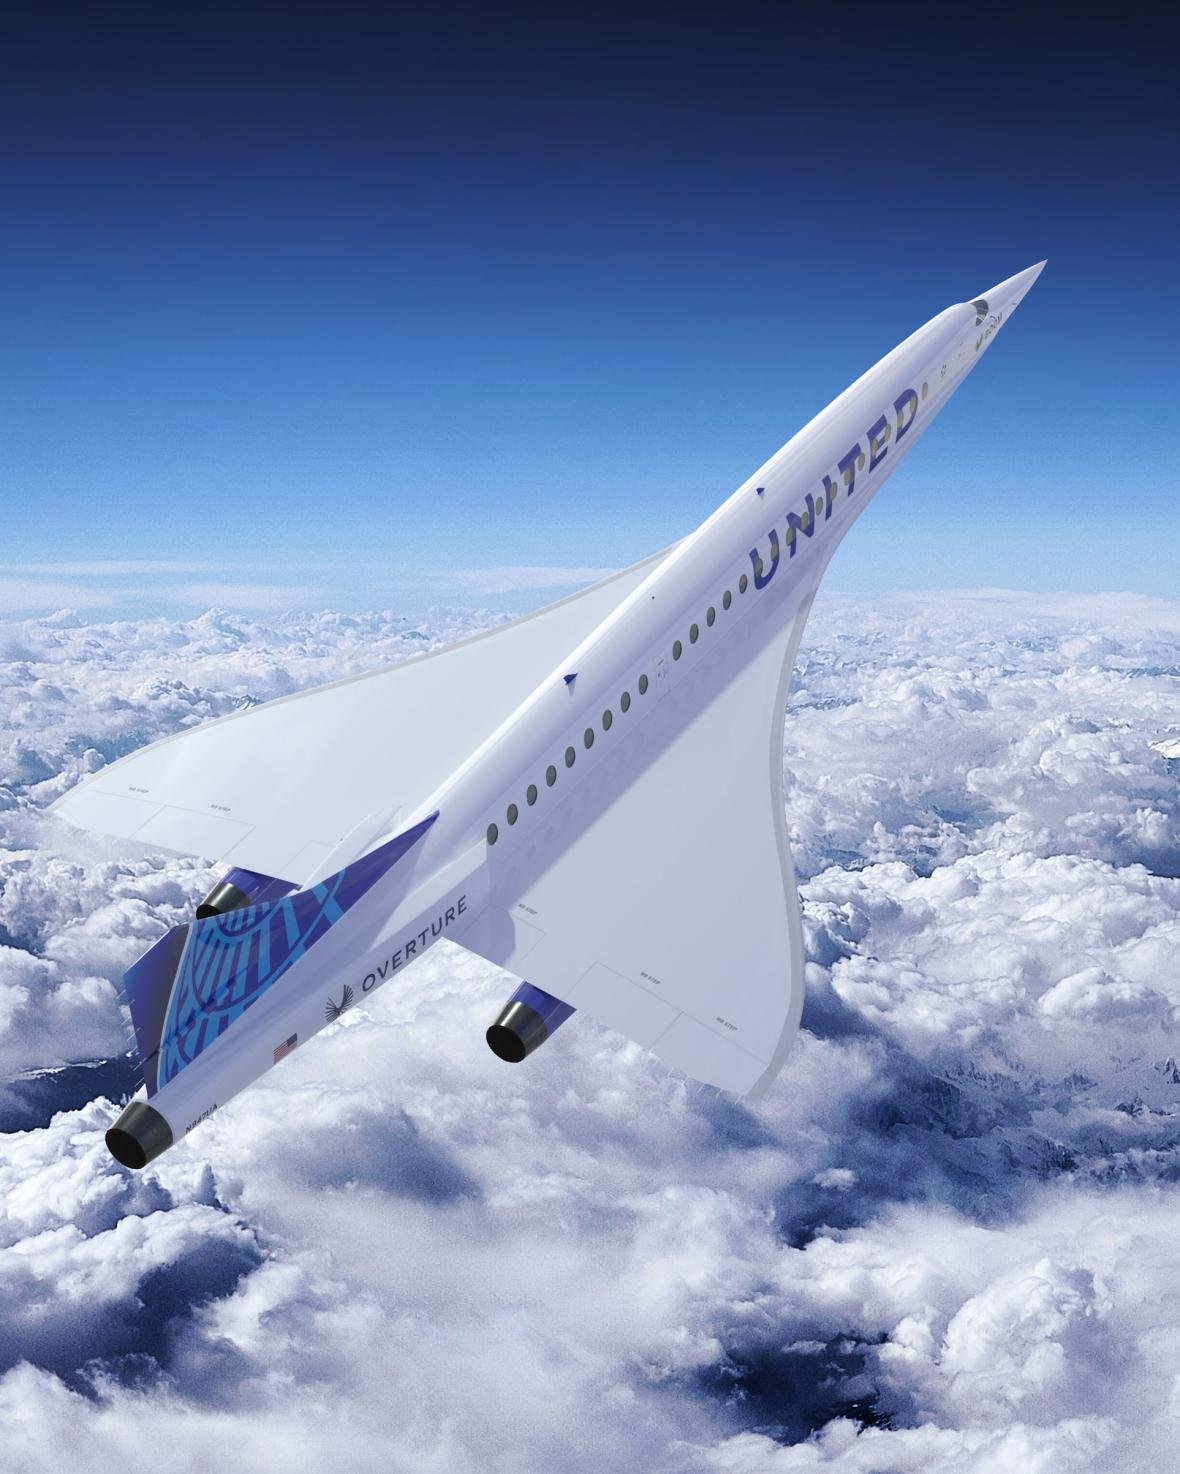 news without media bias supersonic travel